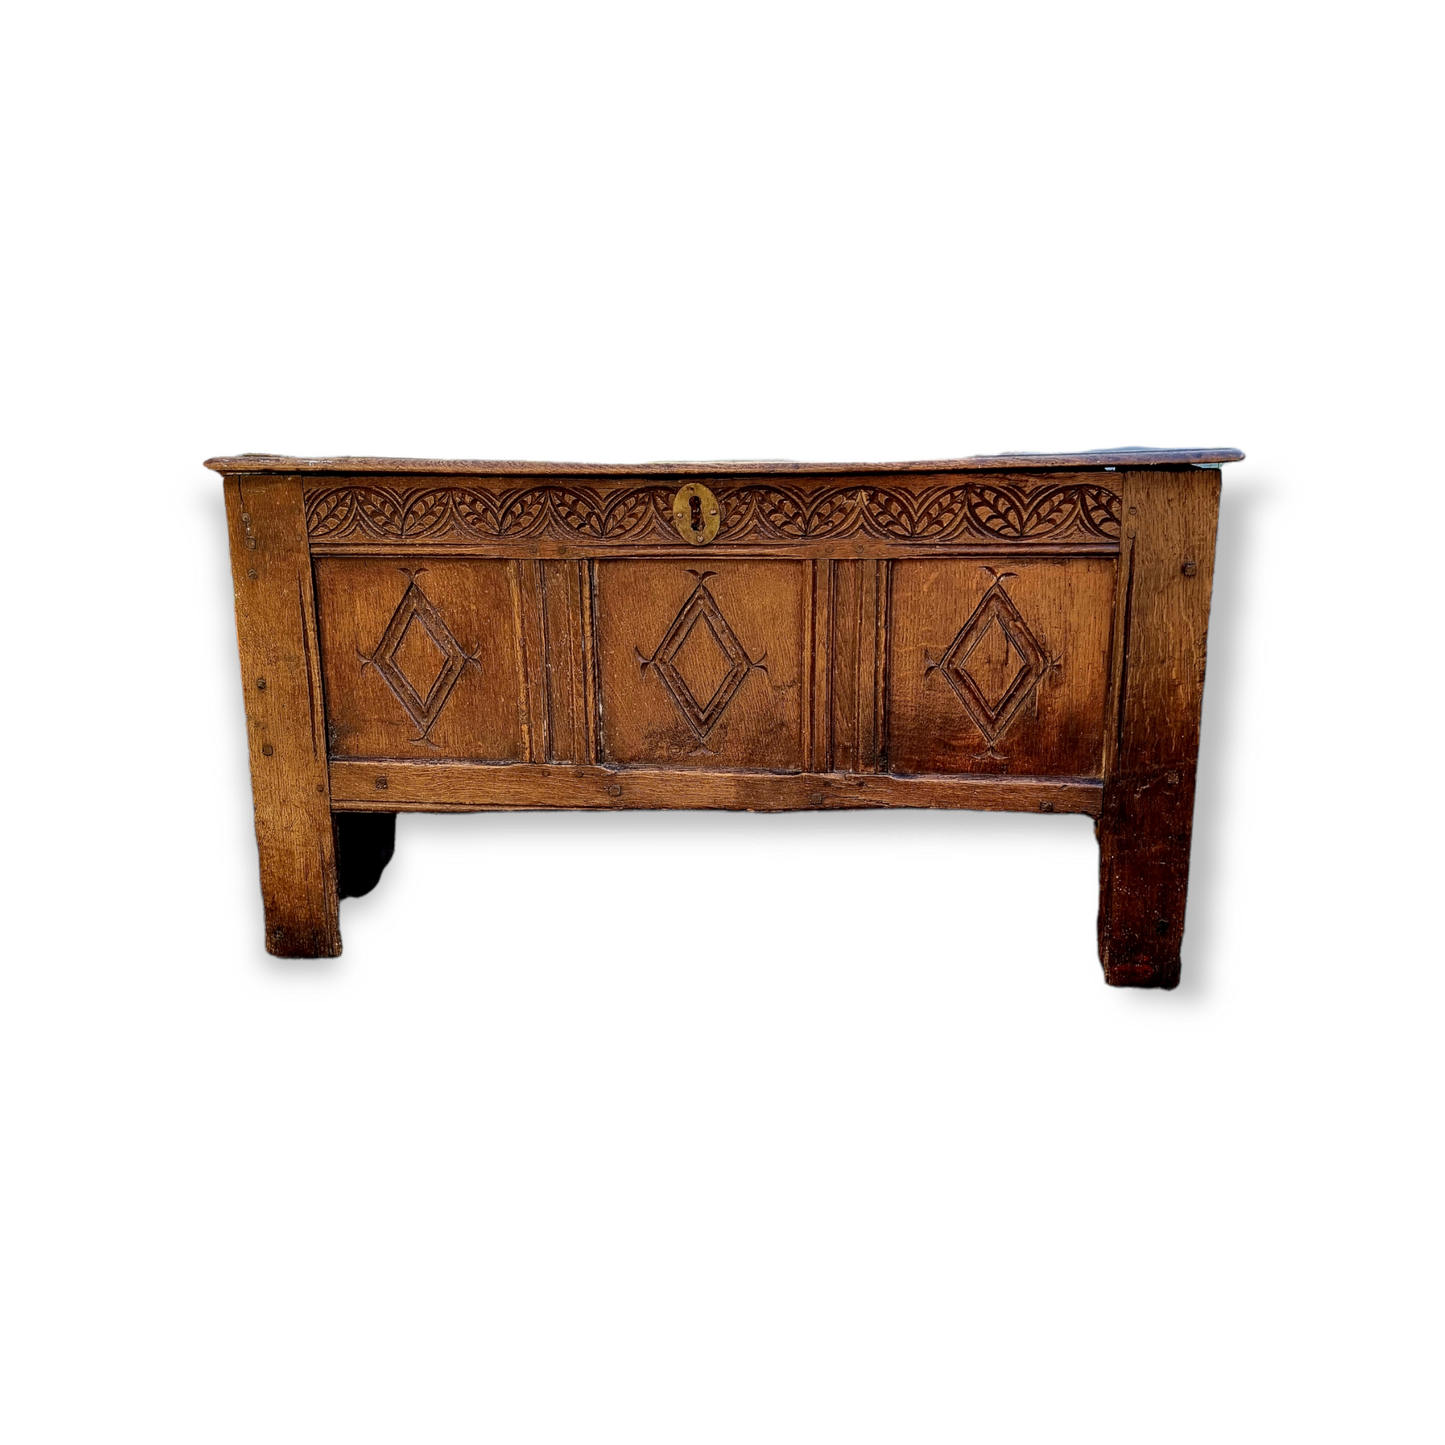 Late 16th Century English Antique Oak Transitional Coffer or Chest